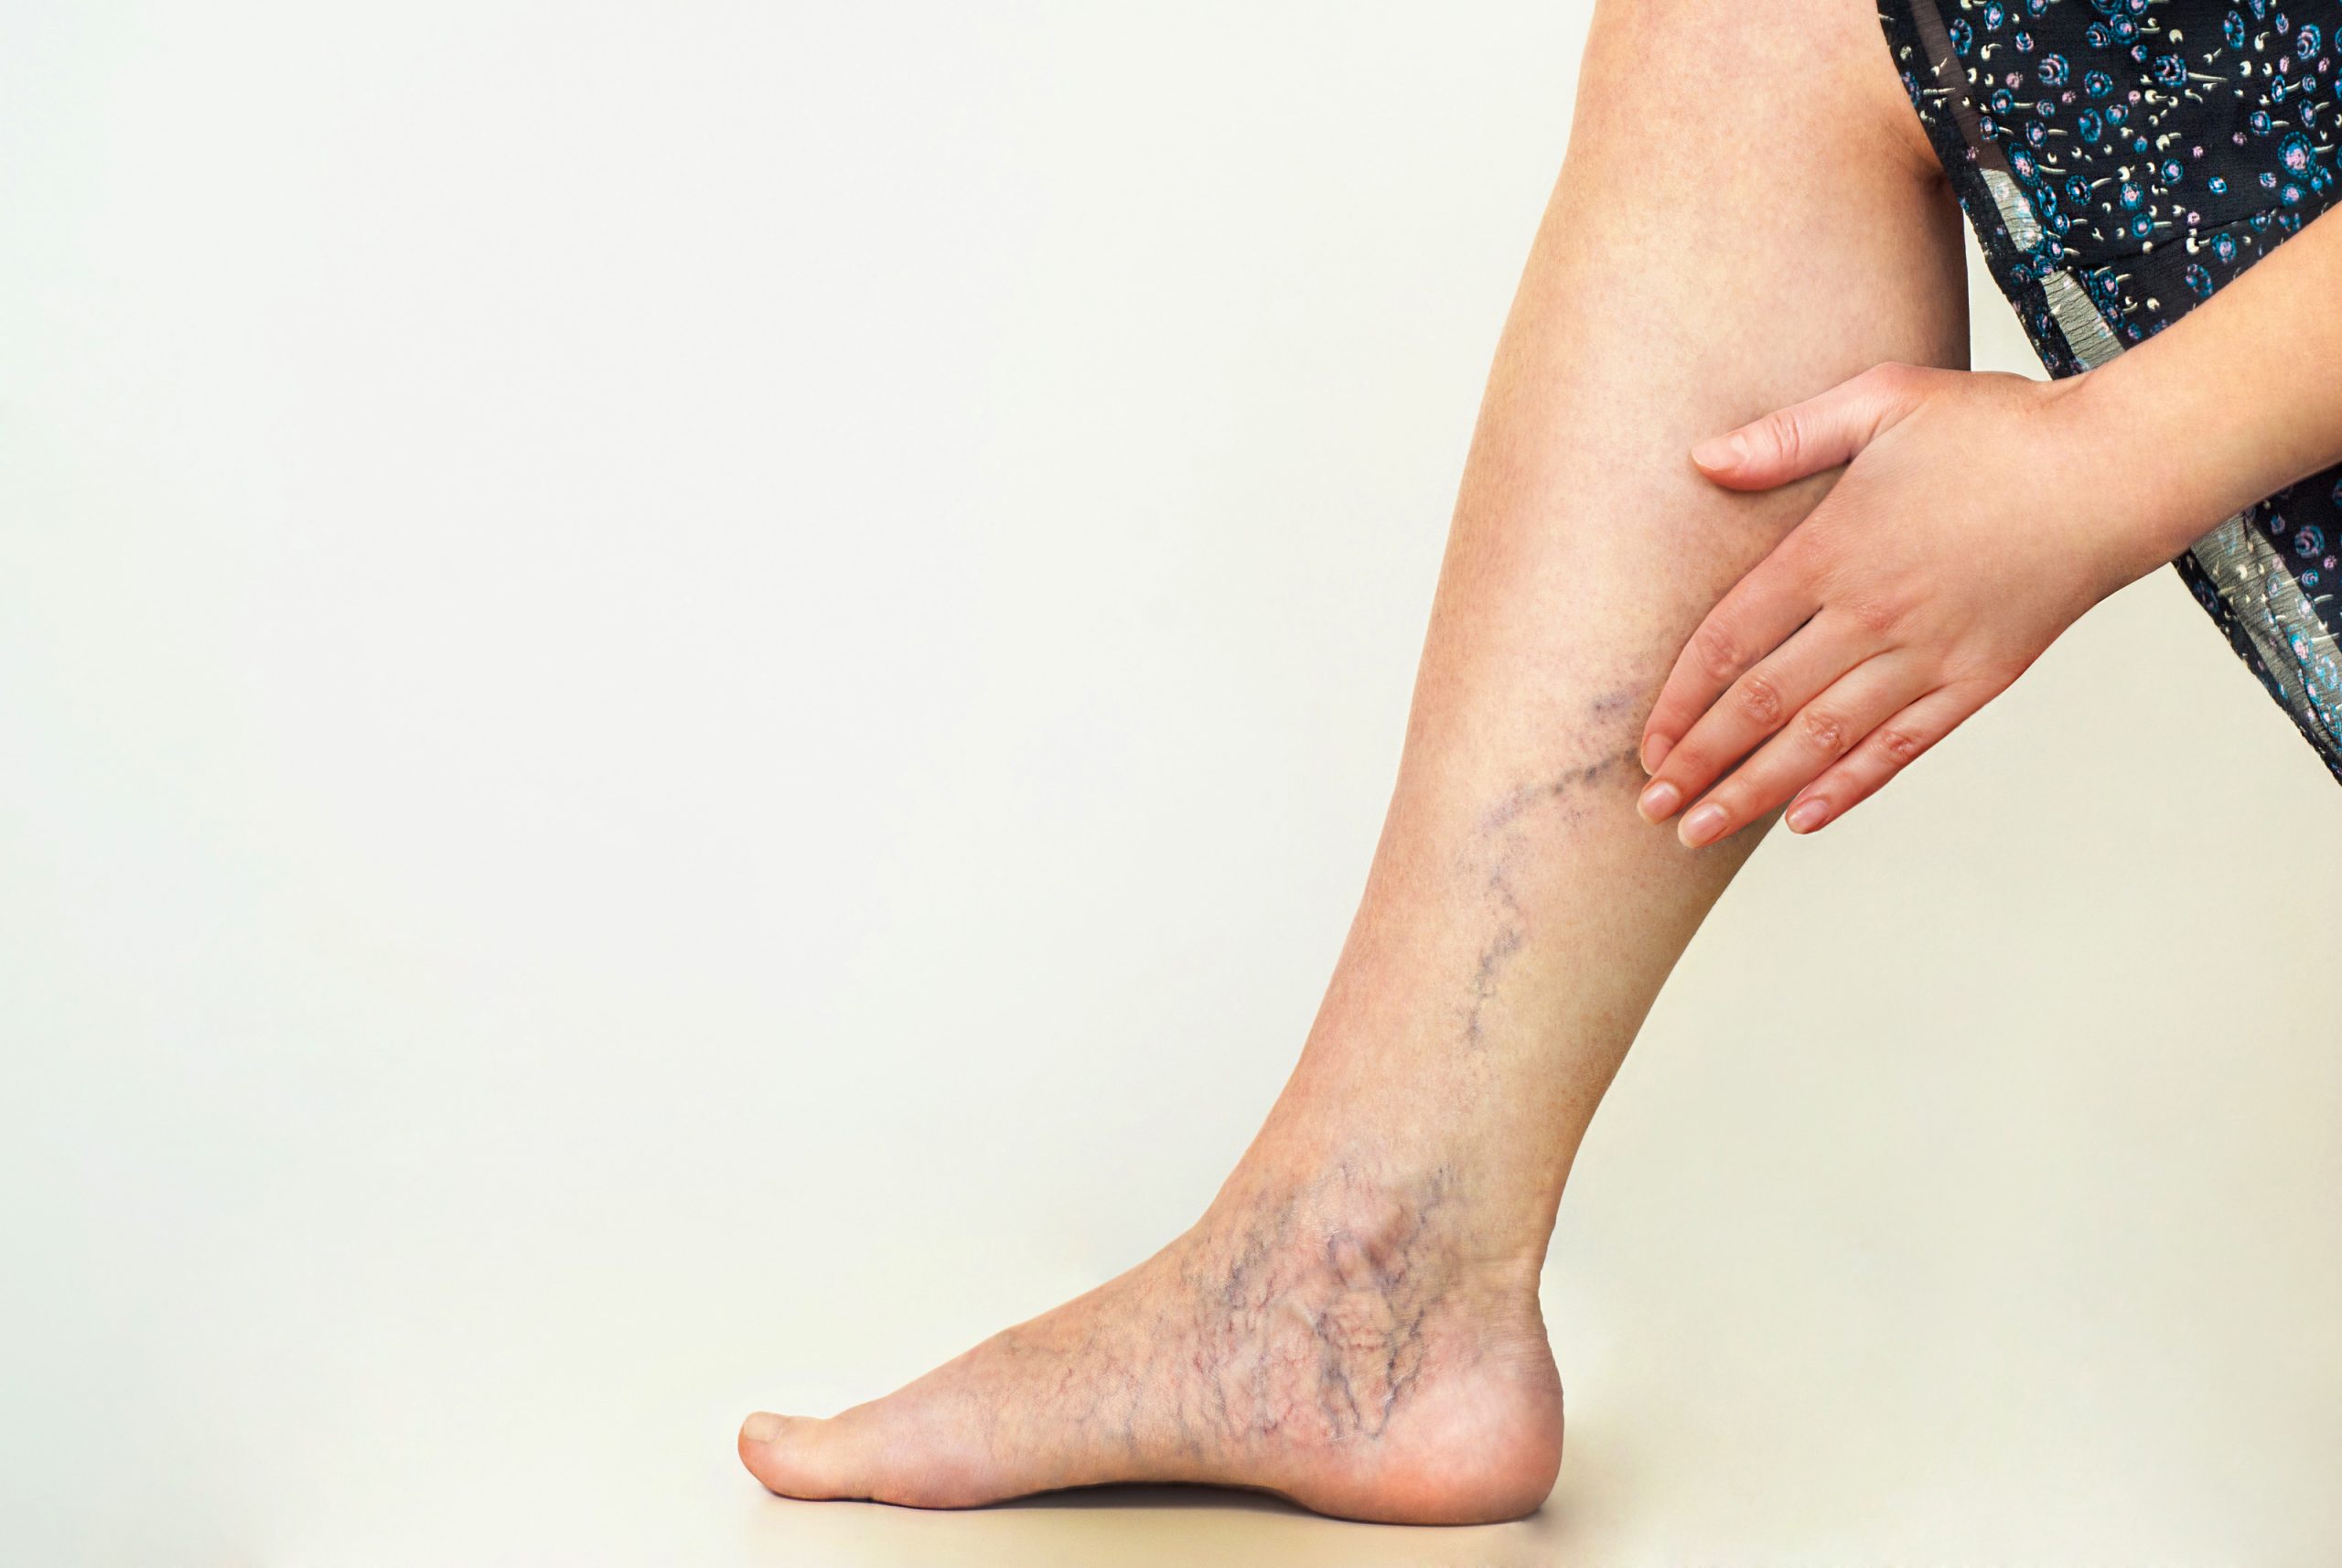 What is the latest treatment for varicose veins